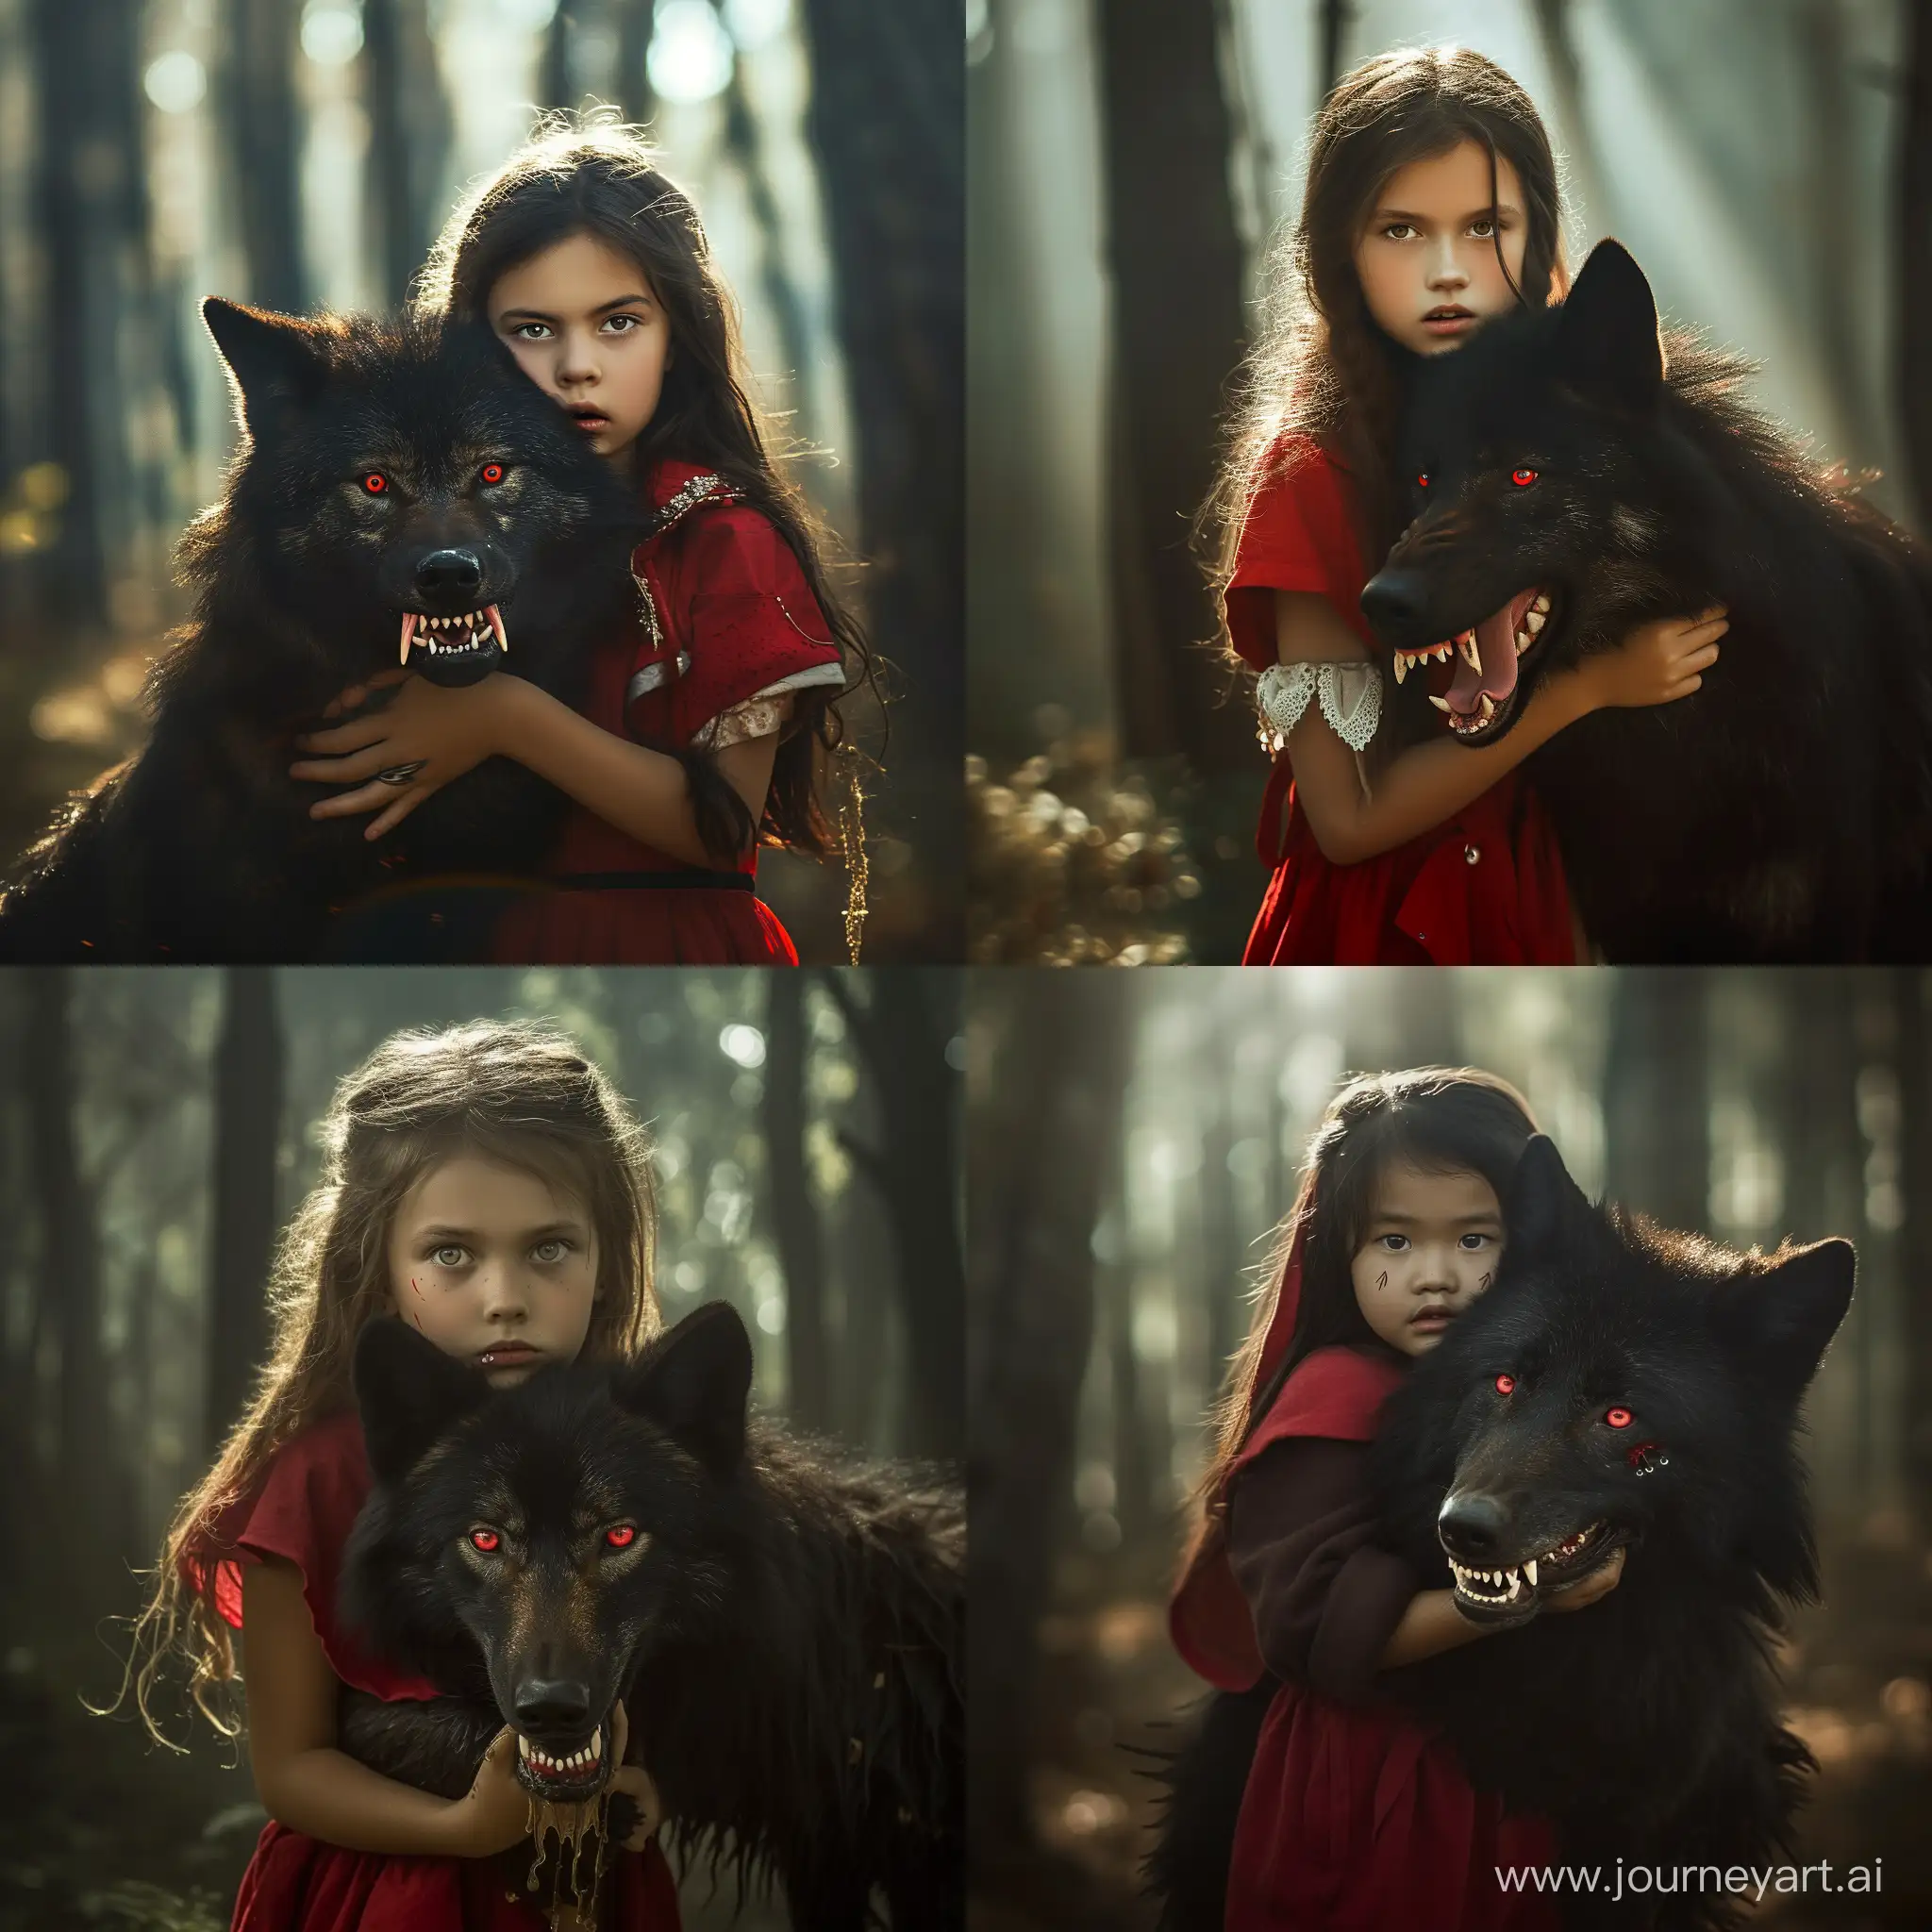 Enchanting-Portrait-Little-Red-Riding-Hood-Embracing-the-Fierce-Black-Wolf-in-Mysterious-Forest-Scene